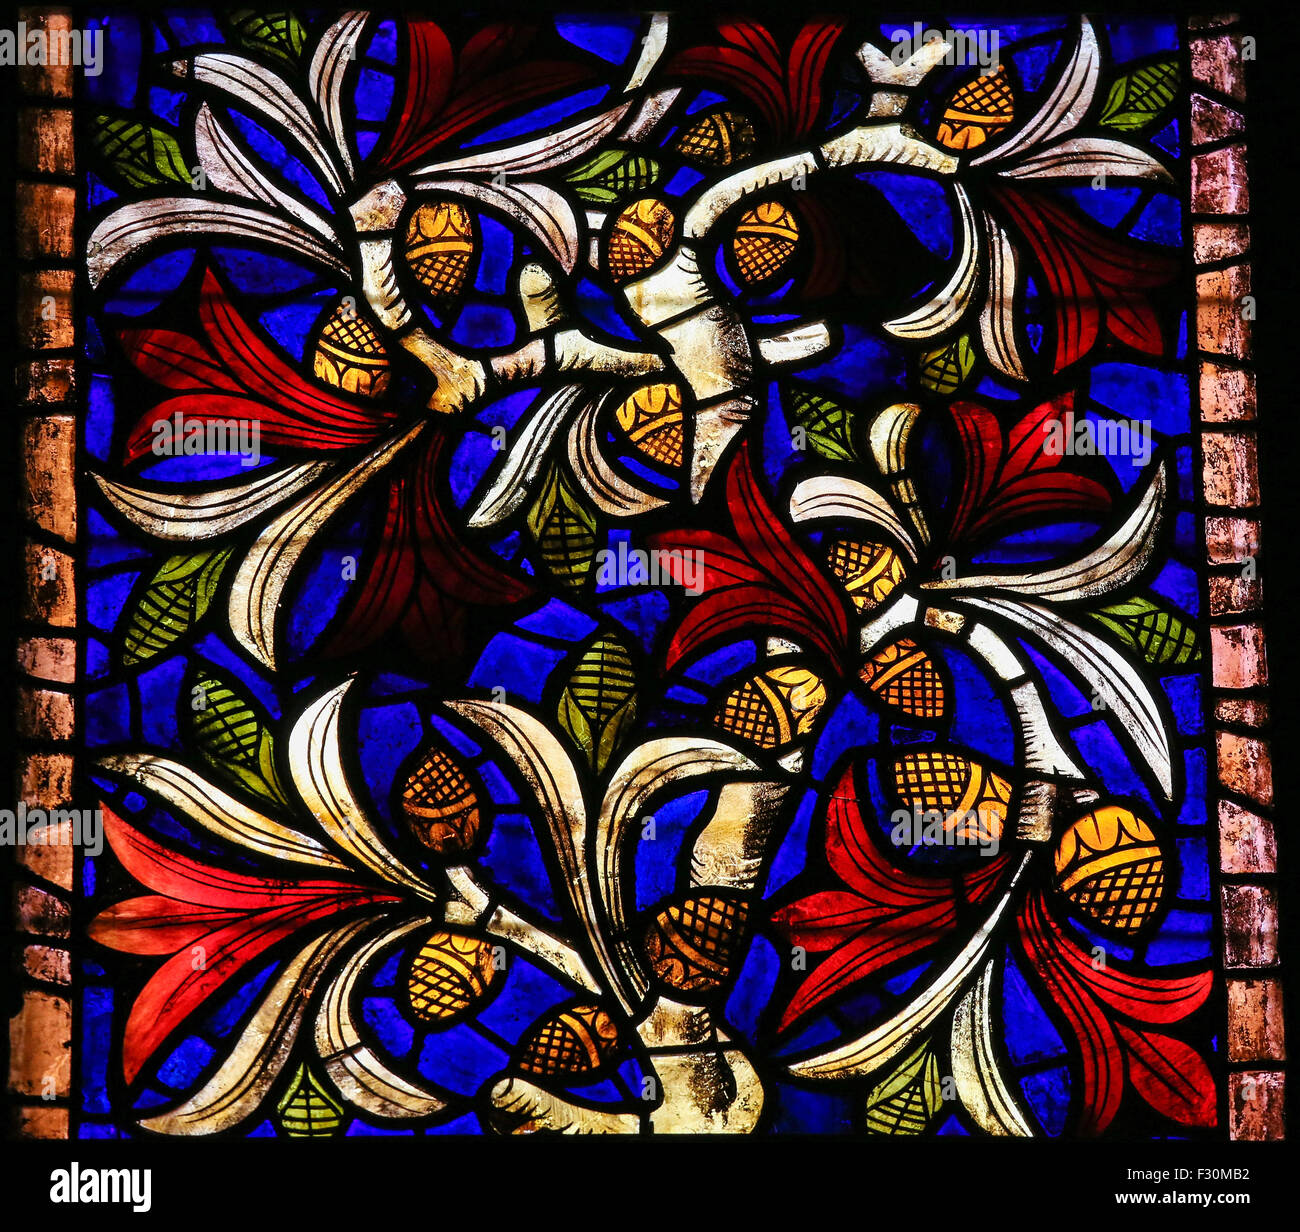 Stained glass window in the cathedral of Leon, Castille and Leon, Spain. Stock Photo